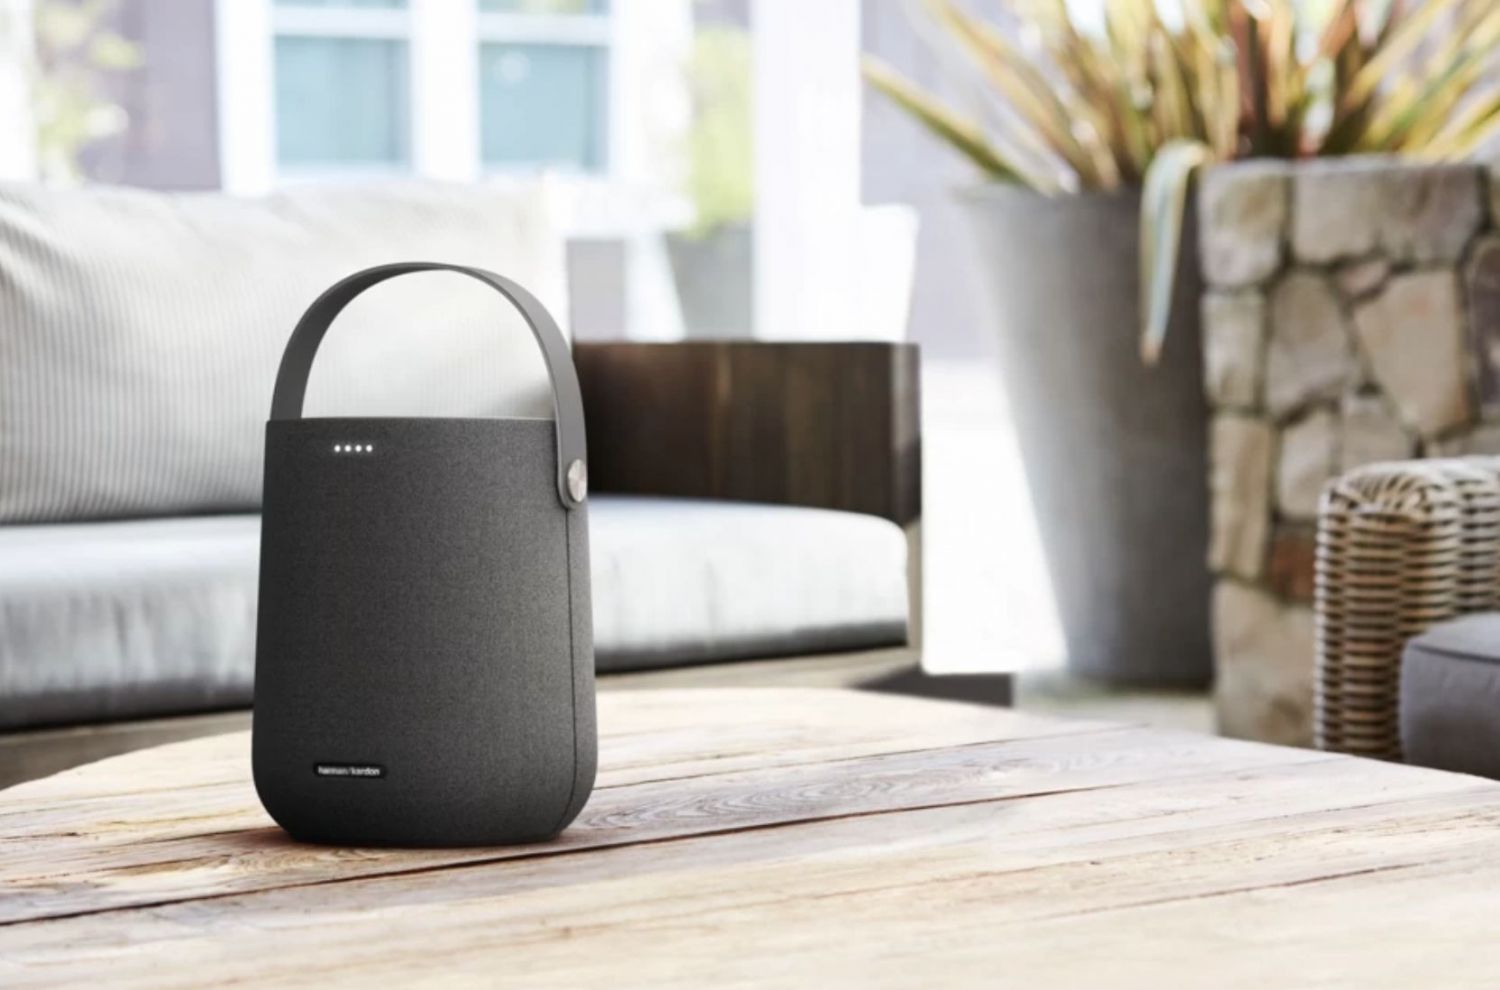 New JBL & Harman Kardon PartyBox Speaker Comes A Bottle Opener Because Why Not? | Geek Culture